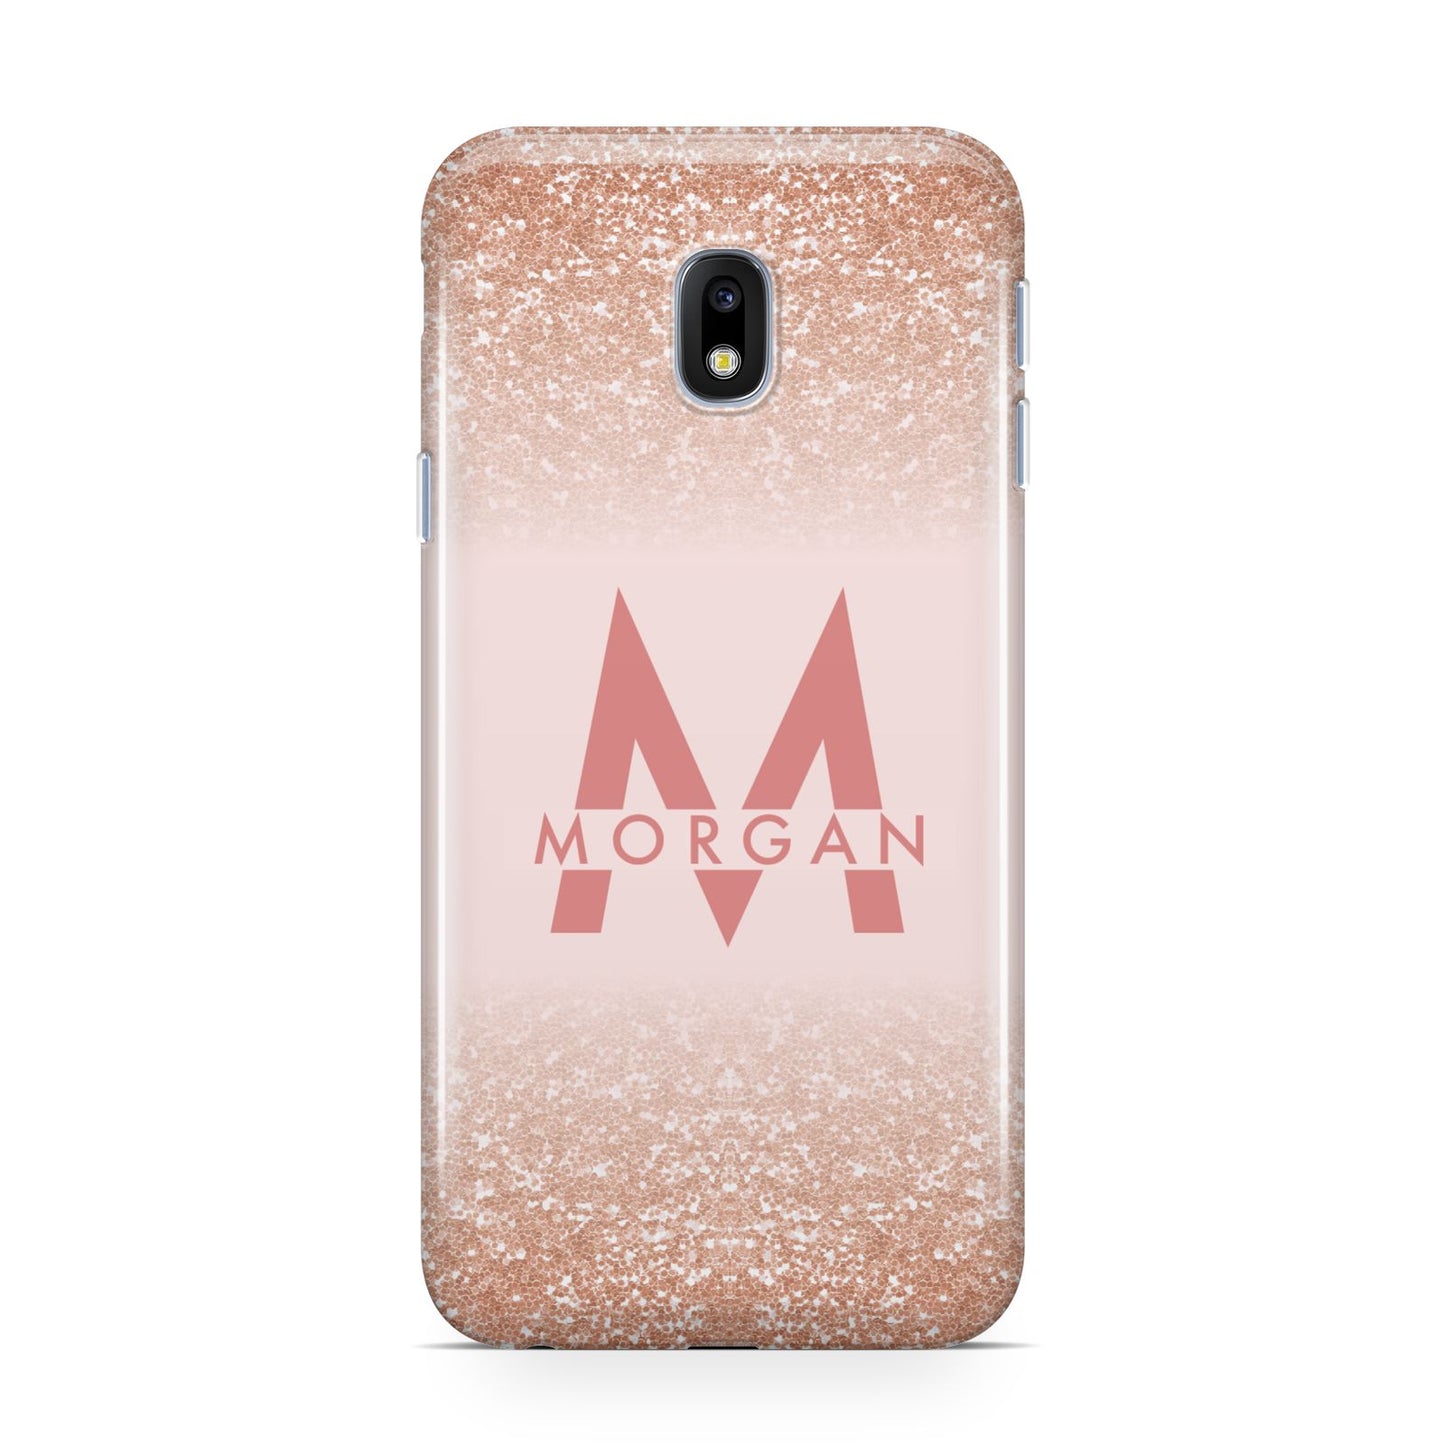 Personalised Printed Glitter Name Initials Samsung Galaxy J3 2017 Case